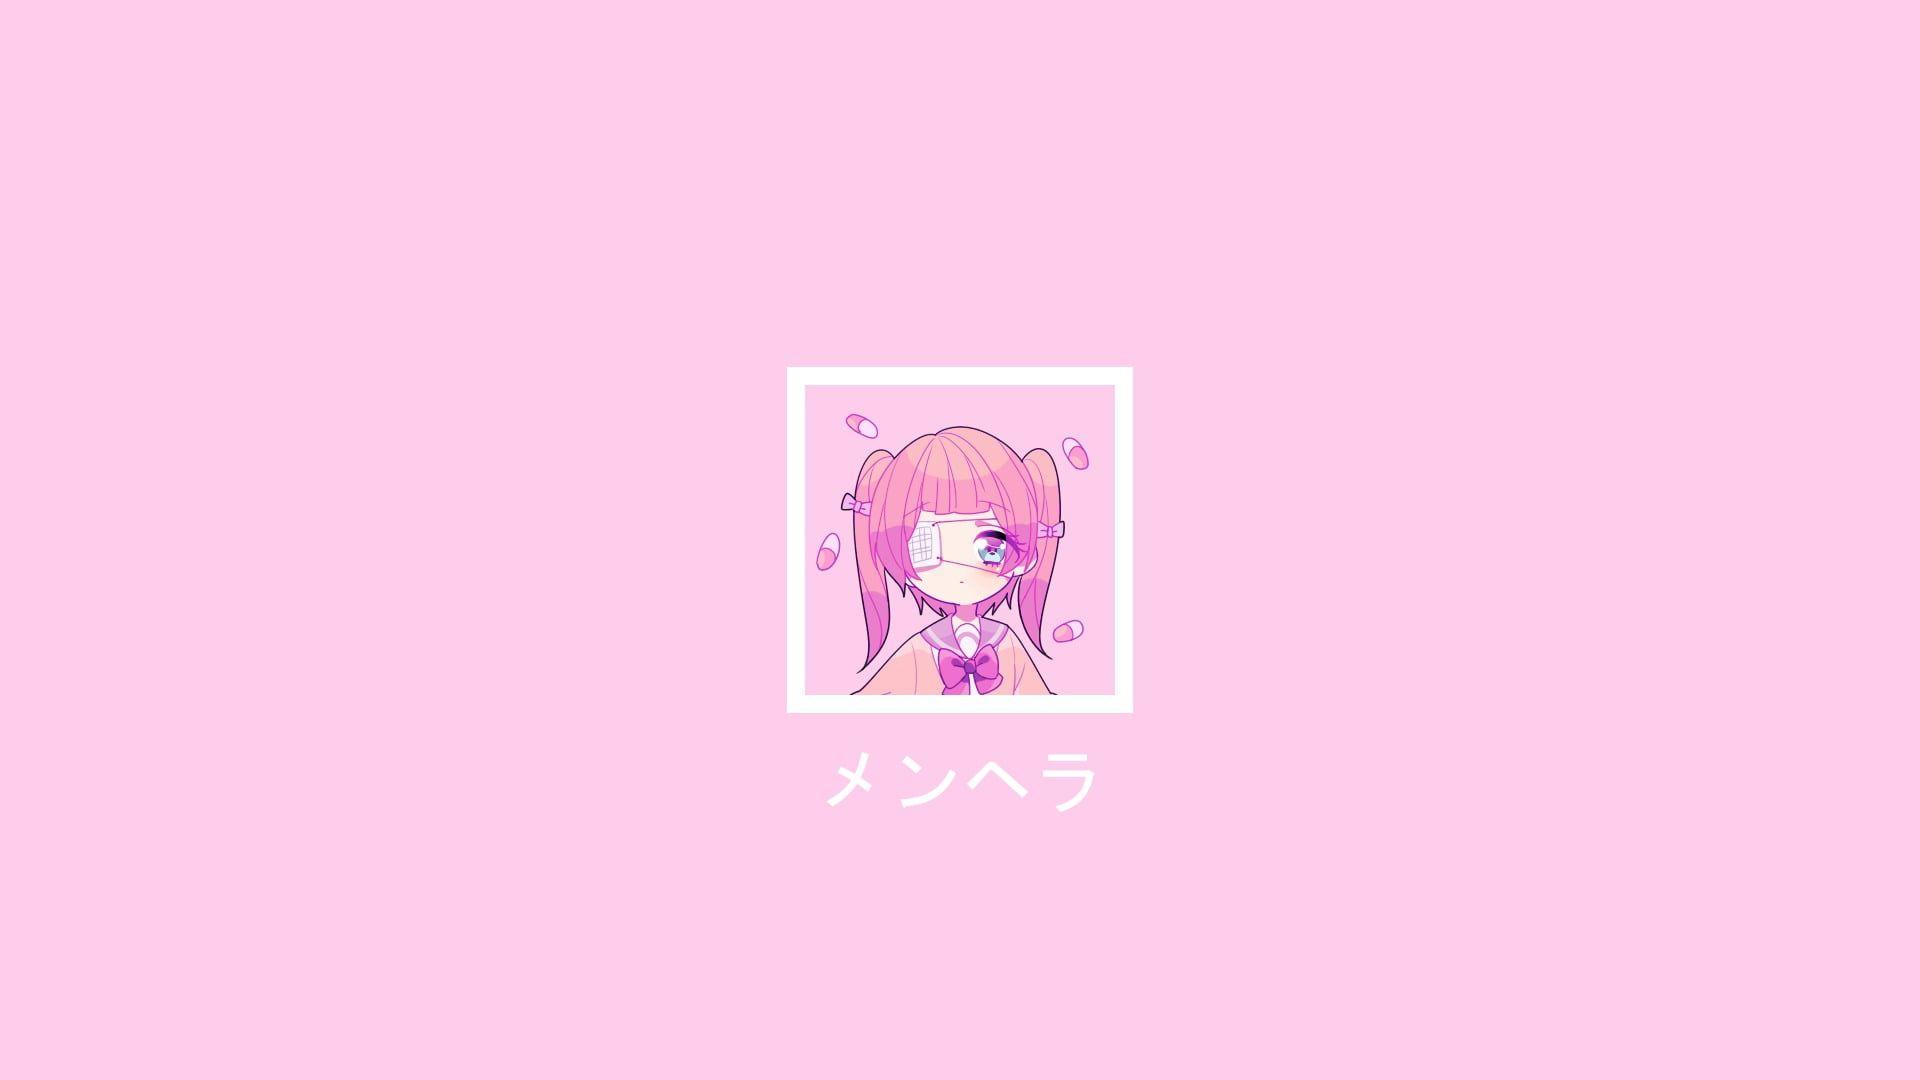 Aesthetic Anime Girl Pink Backgrounds Wallpaper Cave Aesthetic anime background 4k 8k wallpapers for your desktop or mobile screen free and easy to download. aesthetic anime girl pink backgrounds - Kawaii